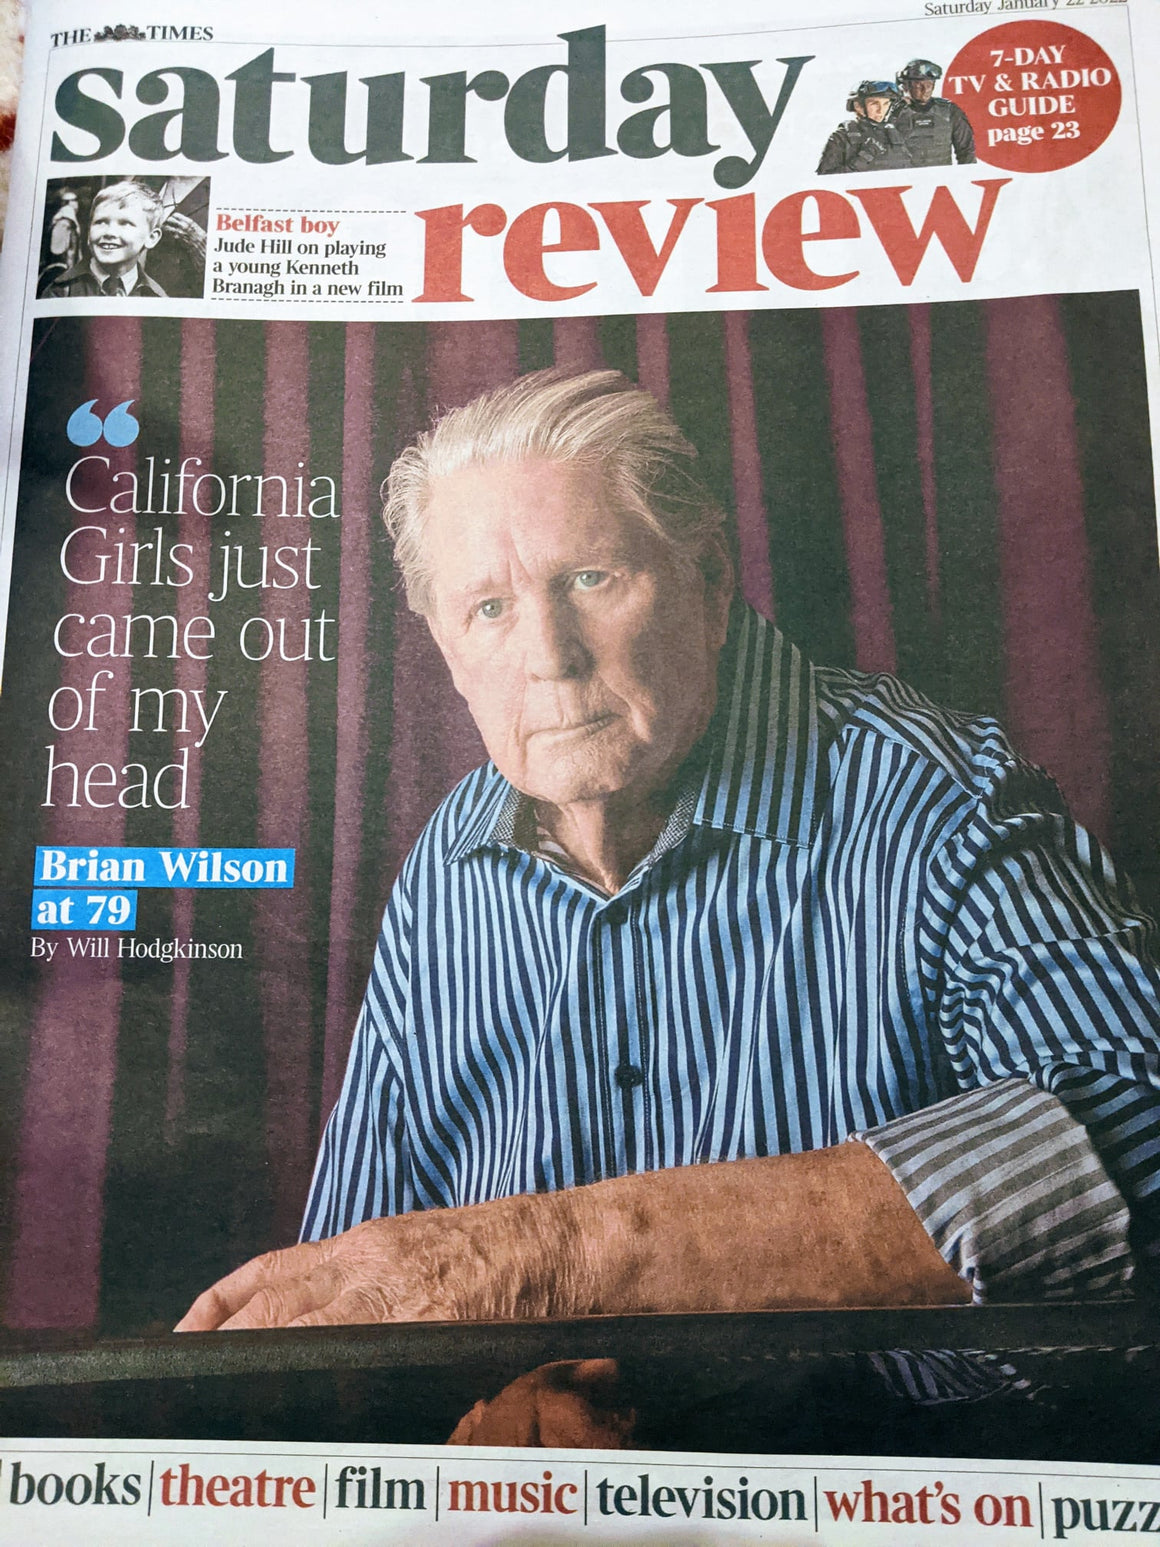 TIMES REVIEW Supplement 22/01/2022 BRIAN WILSON The Beach Boys Cover